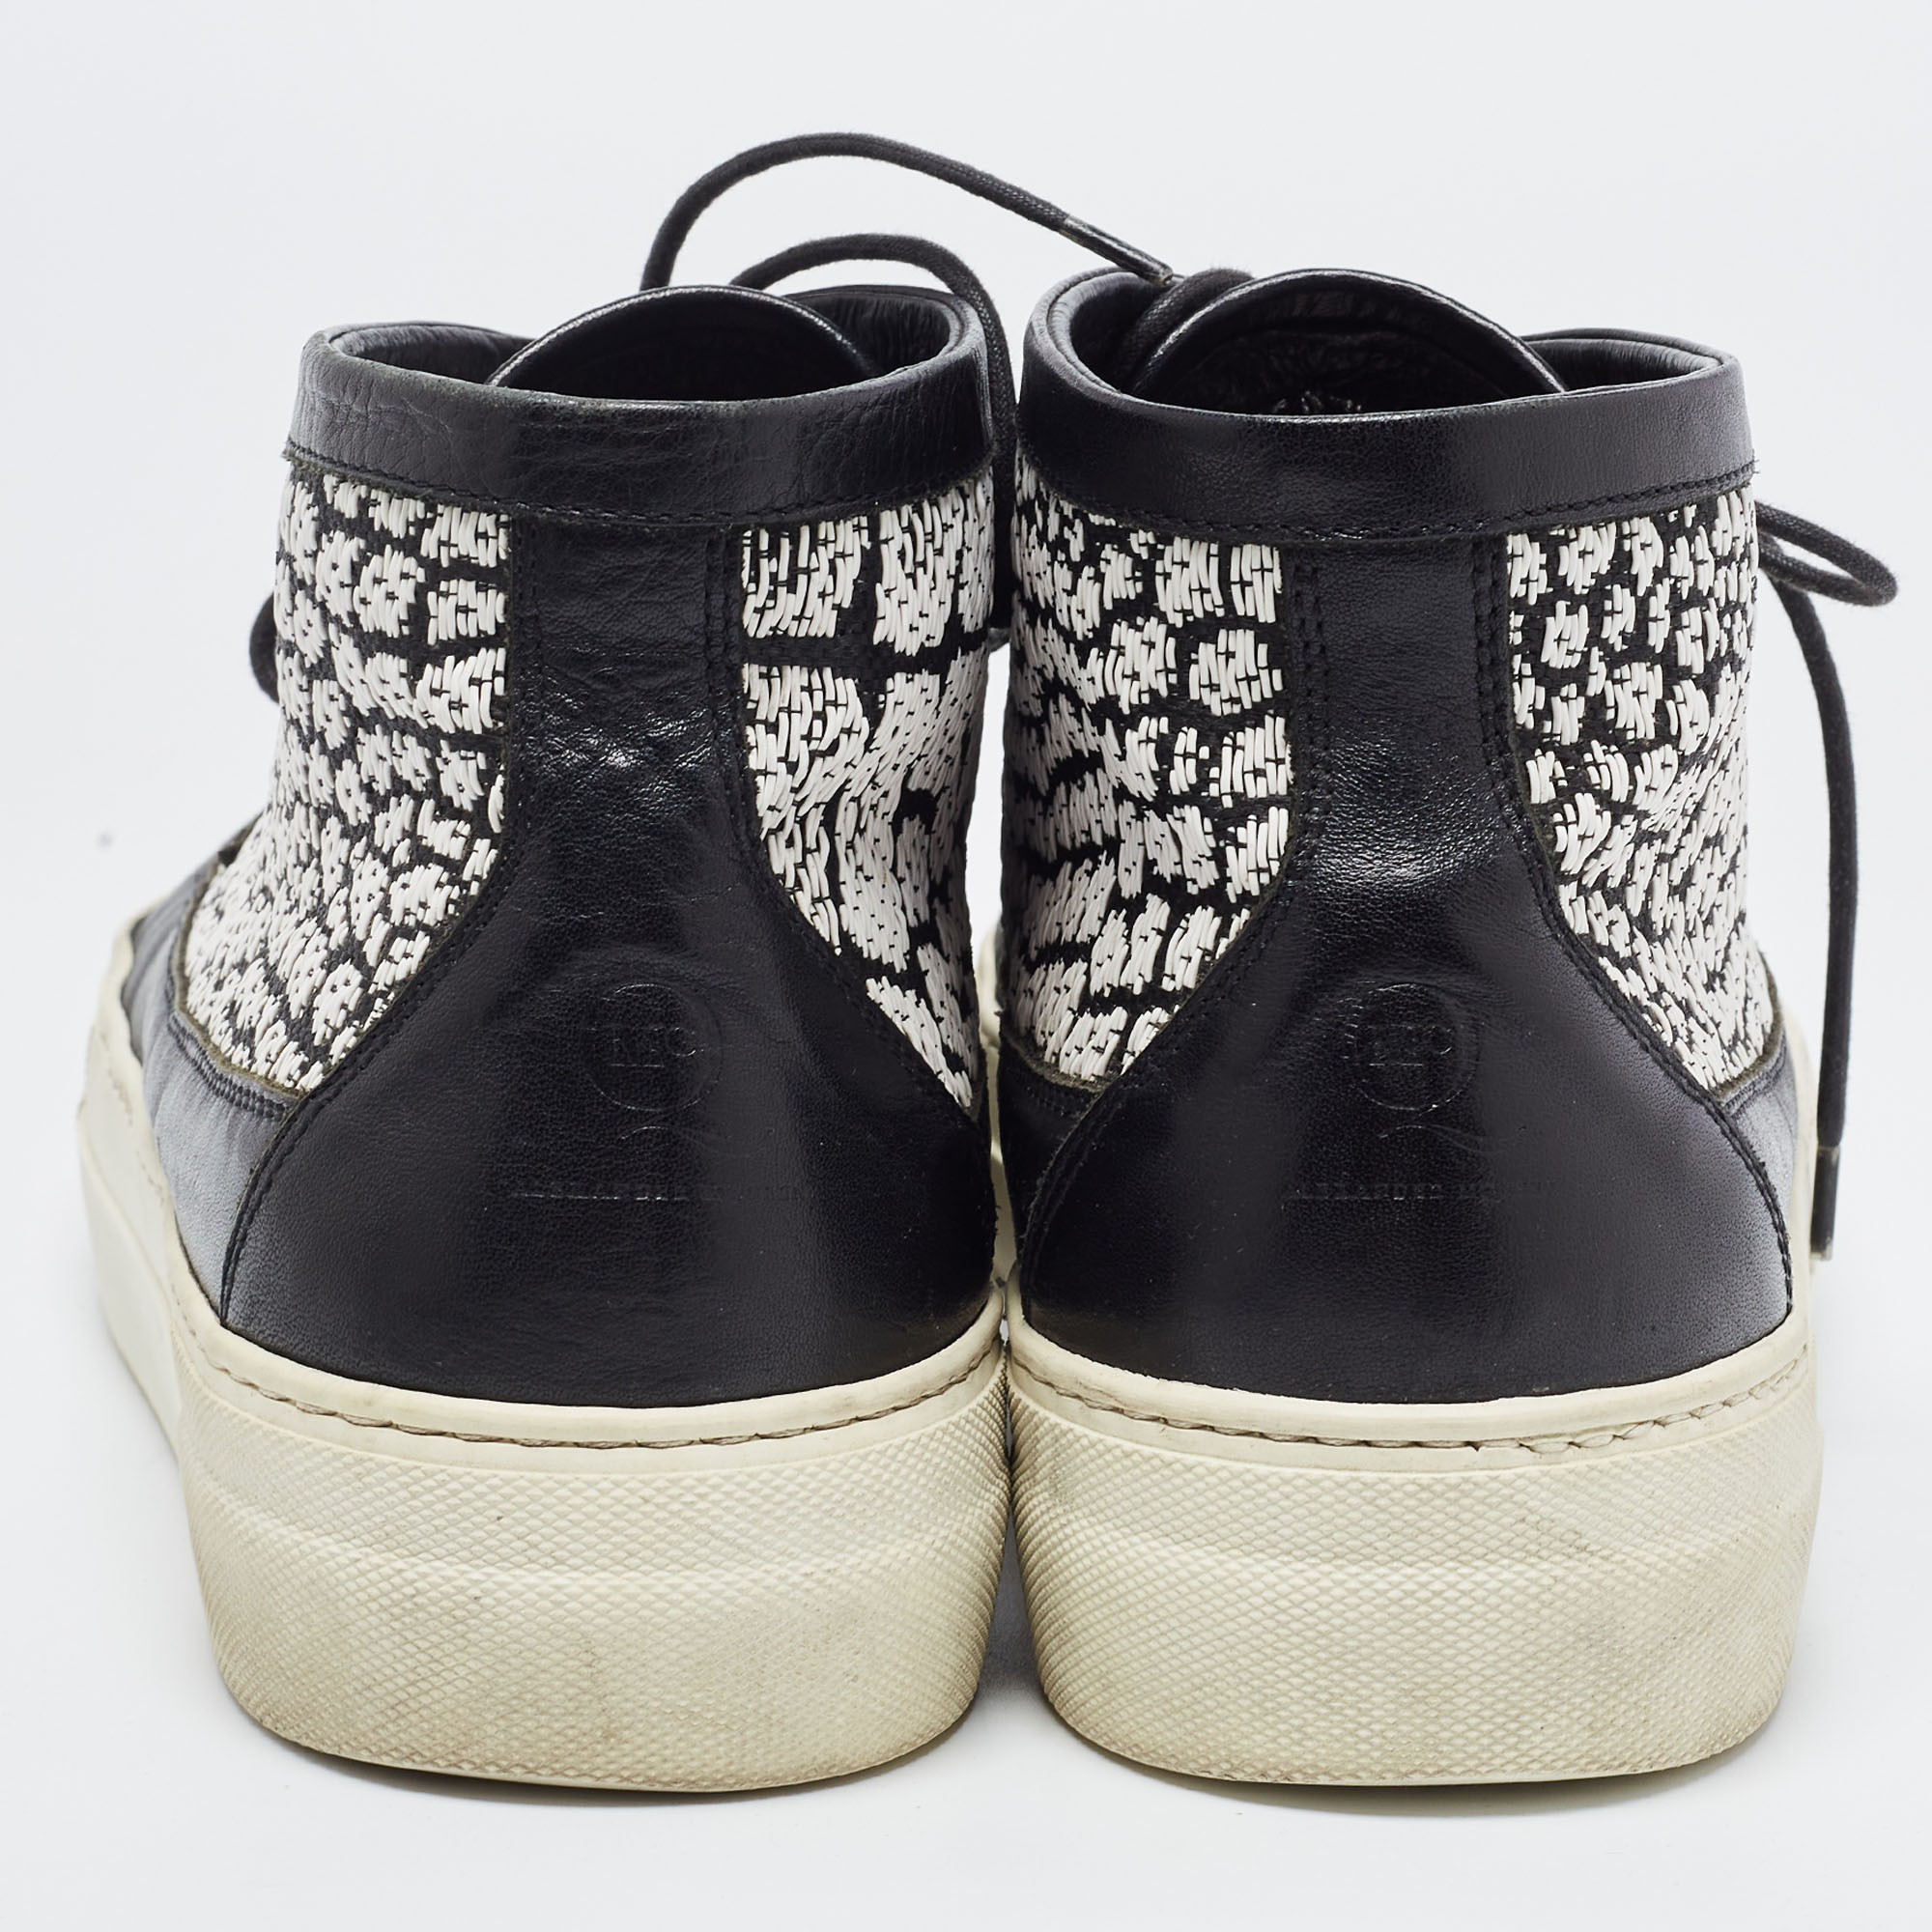 Alexander McQueen Black/White Leather High Top Sneakers Size 41